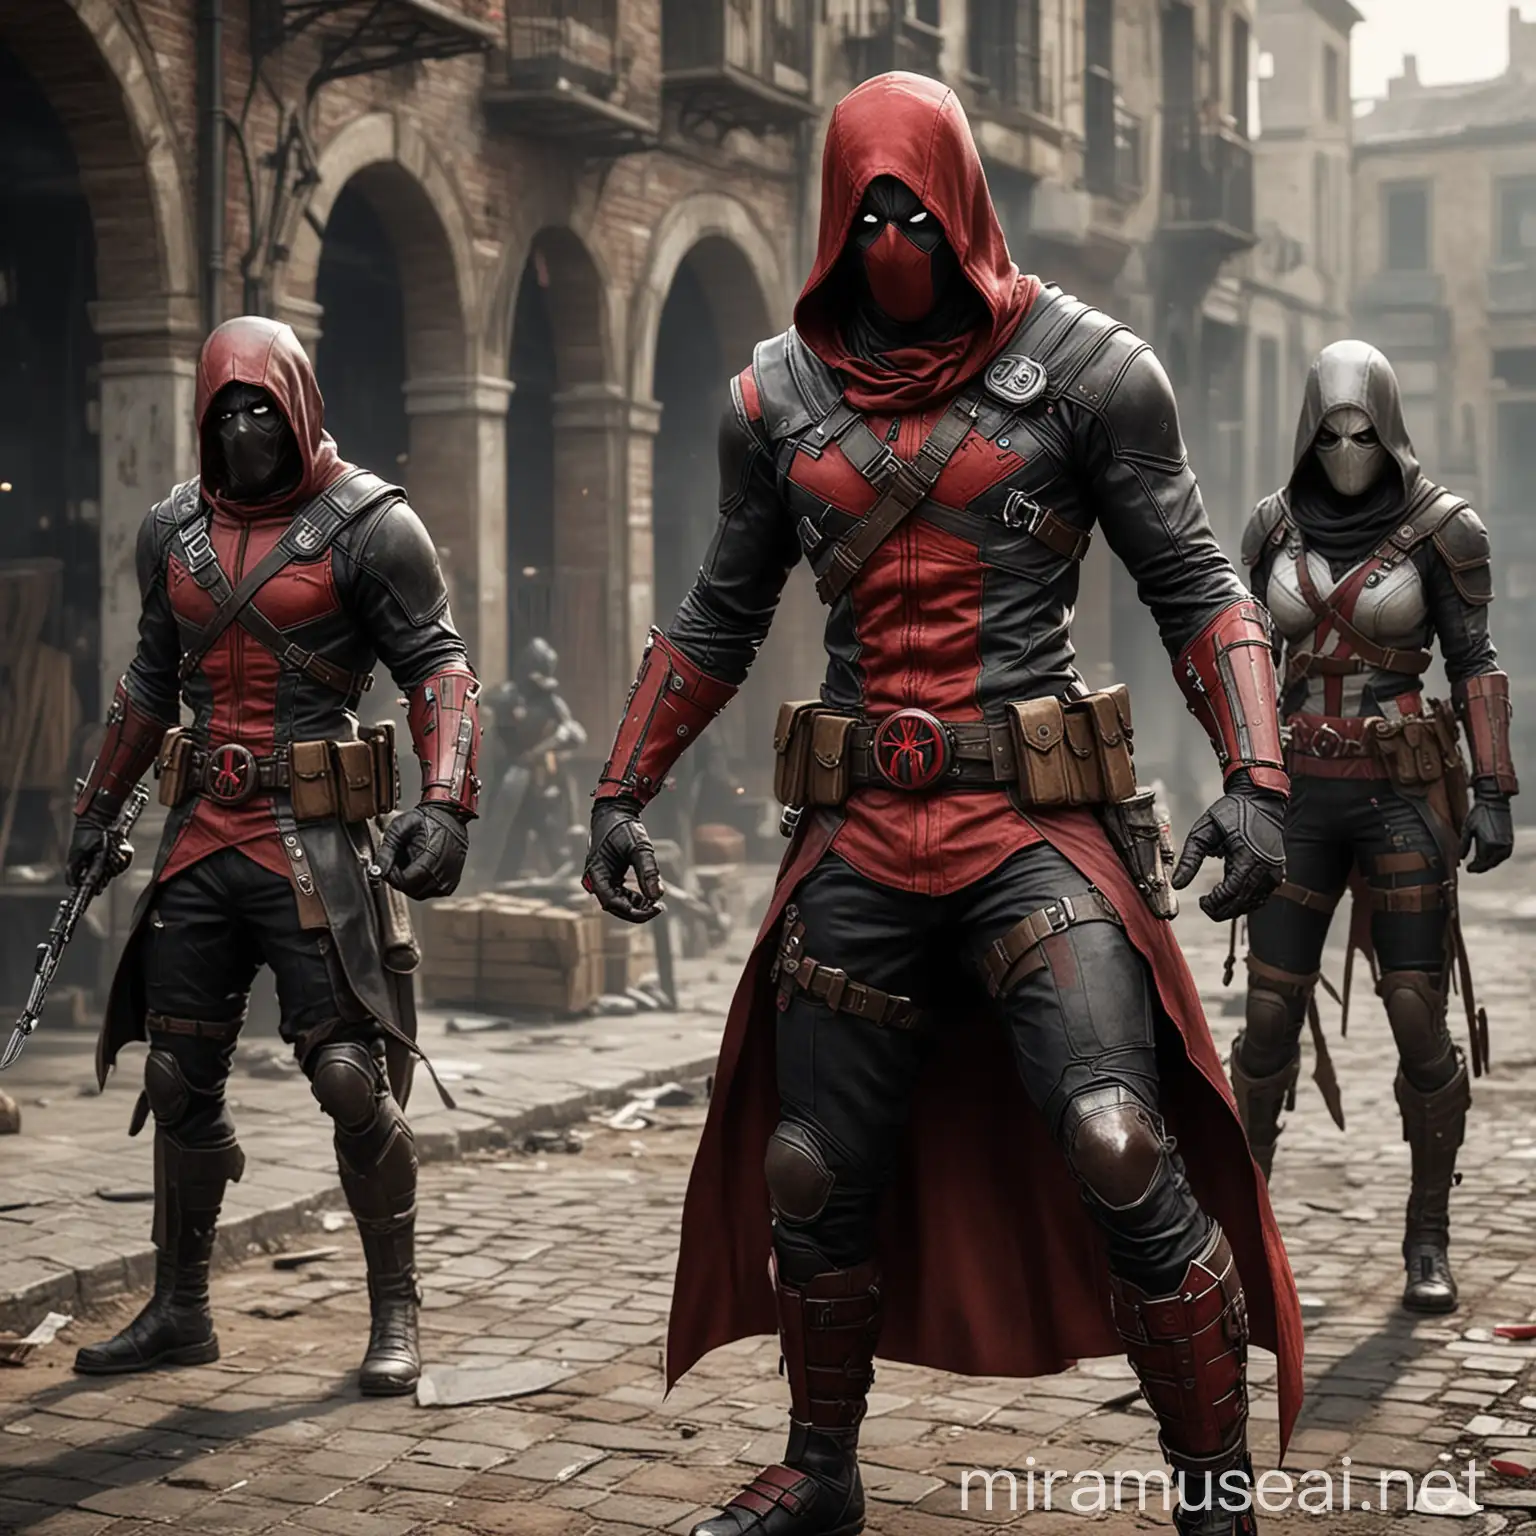 Create a character that combines elements of Assassin's Creed and Deadpool, featuring a sleek metallic suit. The suit should incorporate the iconic hood and stealthy, historical design of Assassin's Creed, combined with the red and black color scheme and mask of Deadpool. Include armor plates and tactical gear with a futuristic metallic sheen. The character should be in an action pose, possibly leaping or preparing for combat. In the background, include the Avengers, but reimagined in Assassin's Creed style with hoods, cloaks, and historical attire, all while maintaining elements of their original costumes. The setting should blend urban and historical environments.